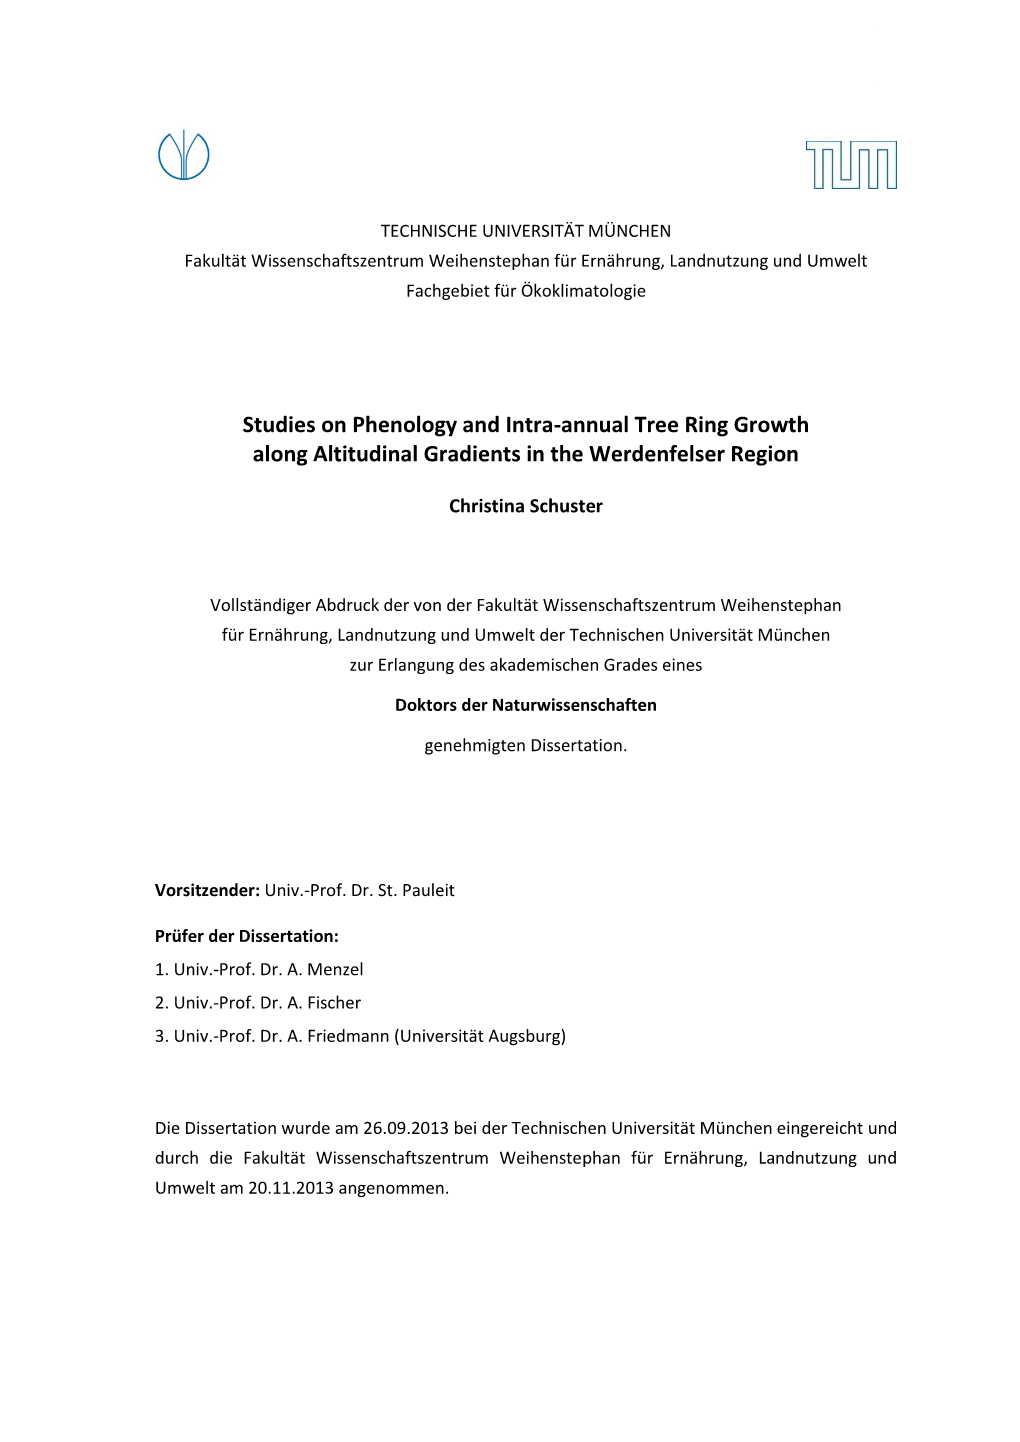 Studies on Phenology and Intra-Annual Tree Ring Growth Along Altitudinal Gradients in the Werdenfelser Region